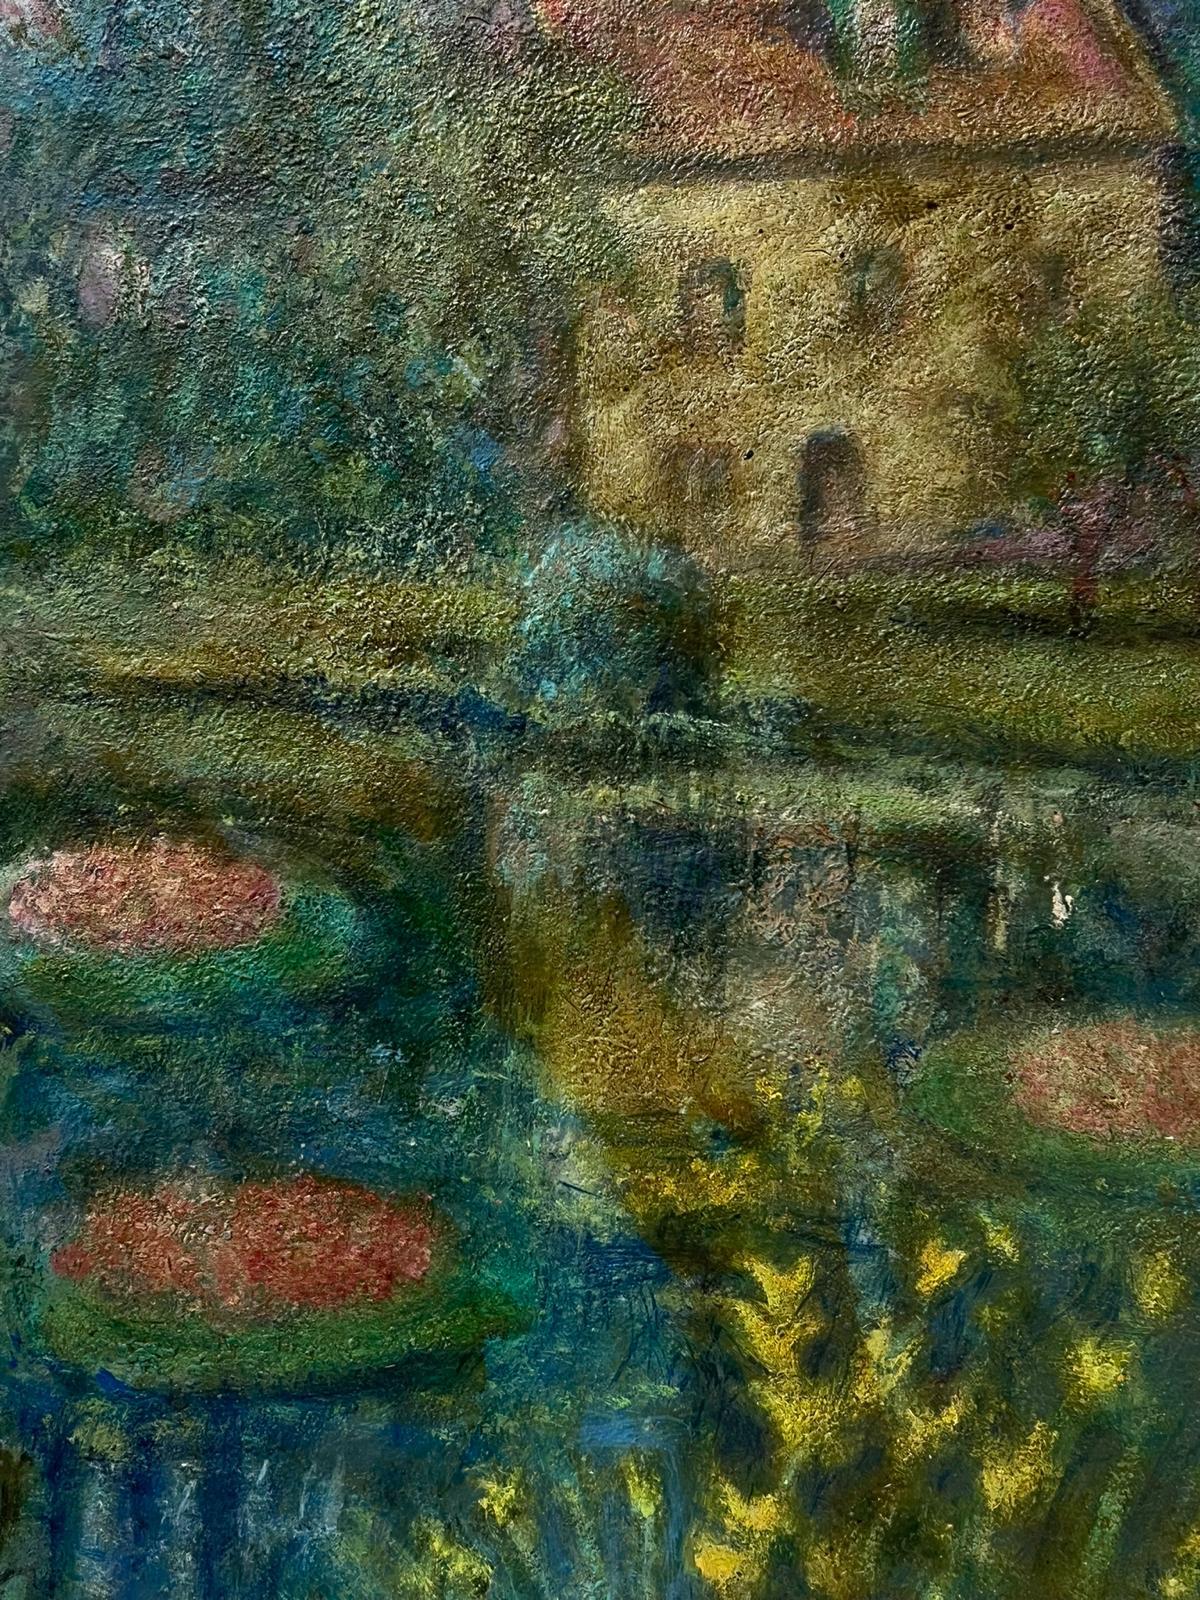 The Lily Pond
by Jacob Markiel (Polish 1911-2008) *See notes signed below oil on board, unframed
board: 25.5 x 19.5 inches
provenance: the artists estate, south of France
condition: very good and sound condition

Jacob Markiel was born into a humble